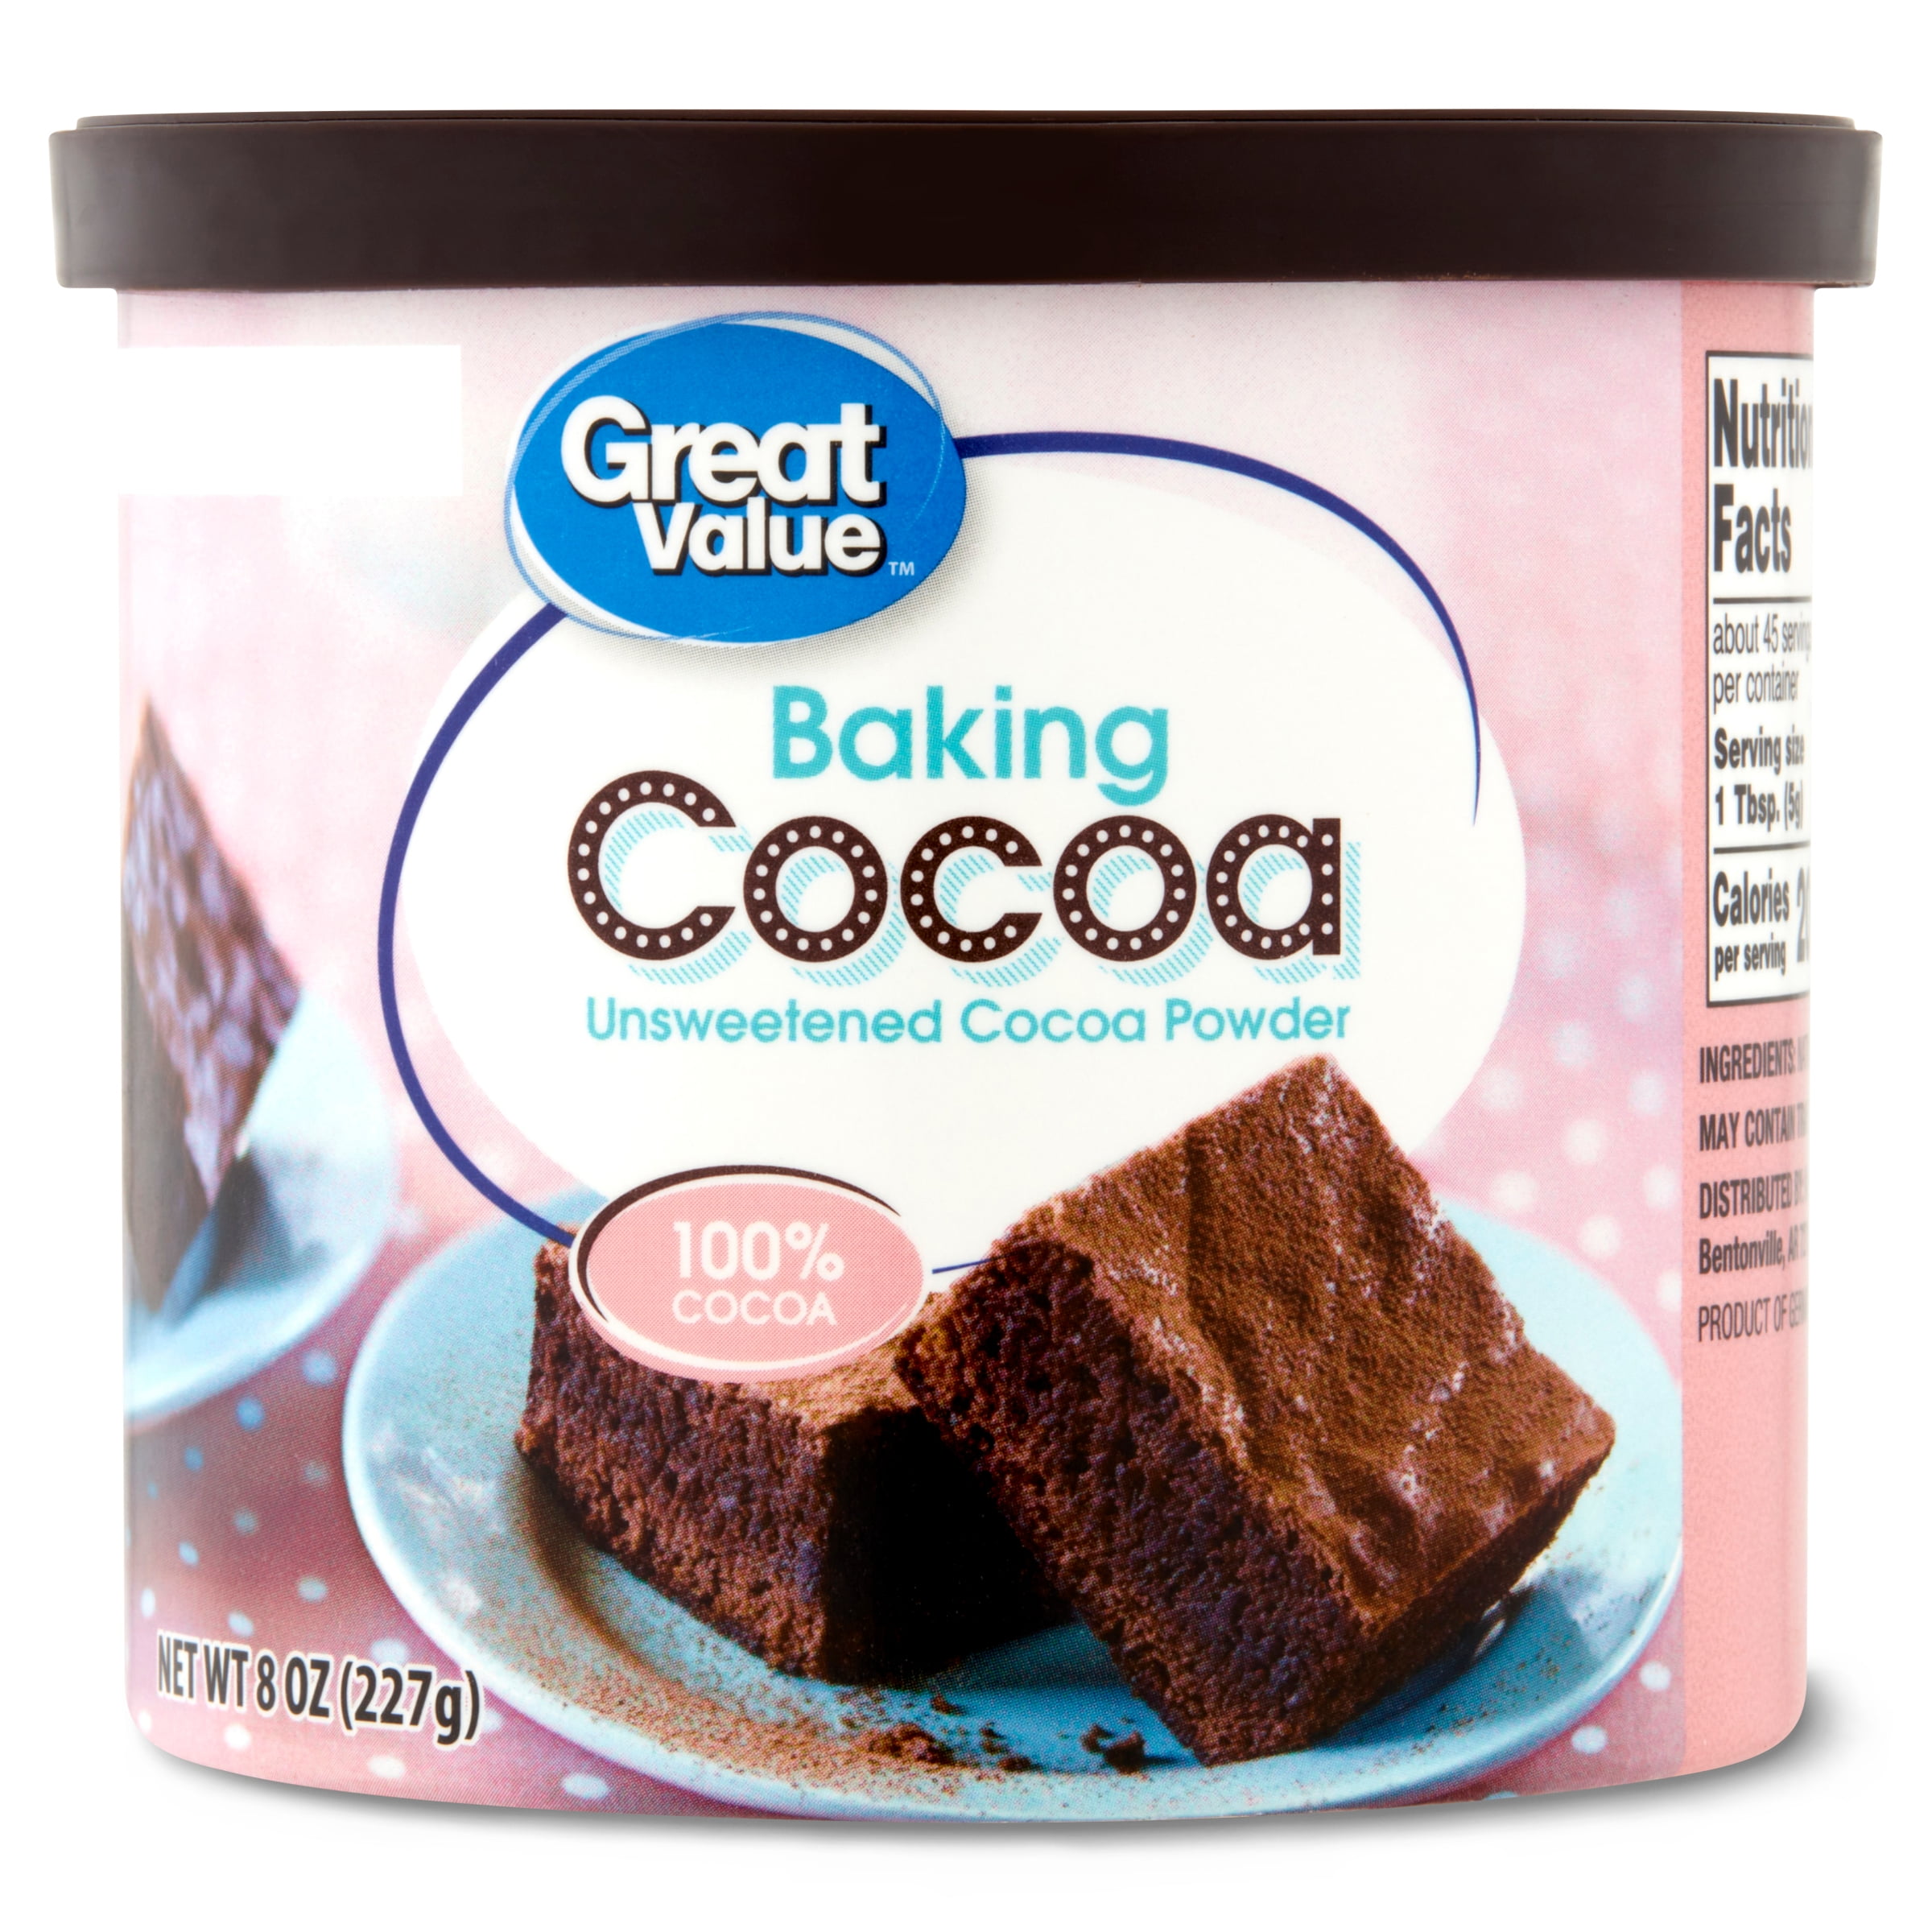 Great Value Baking Unsweetened Cocoa Powder, 8 oz 